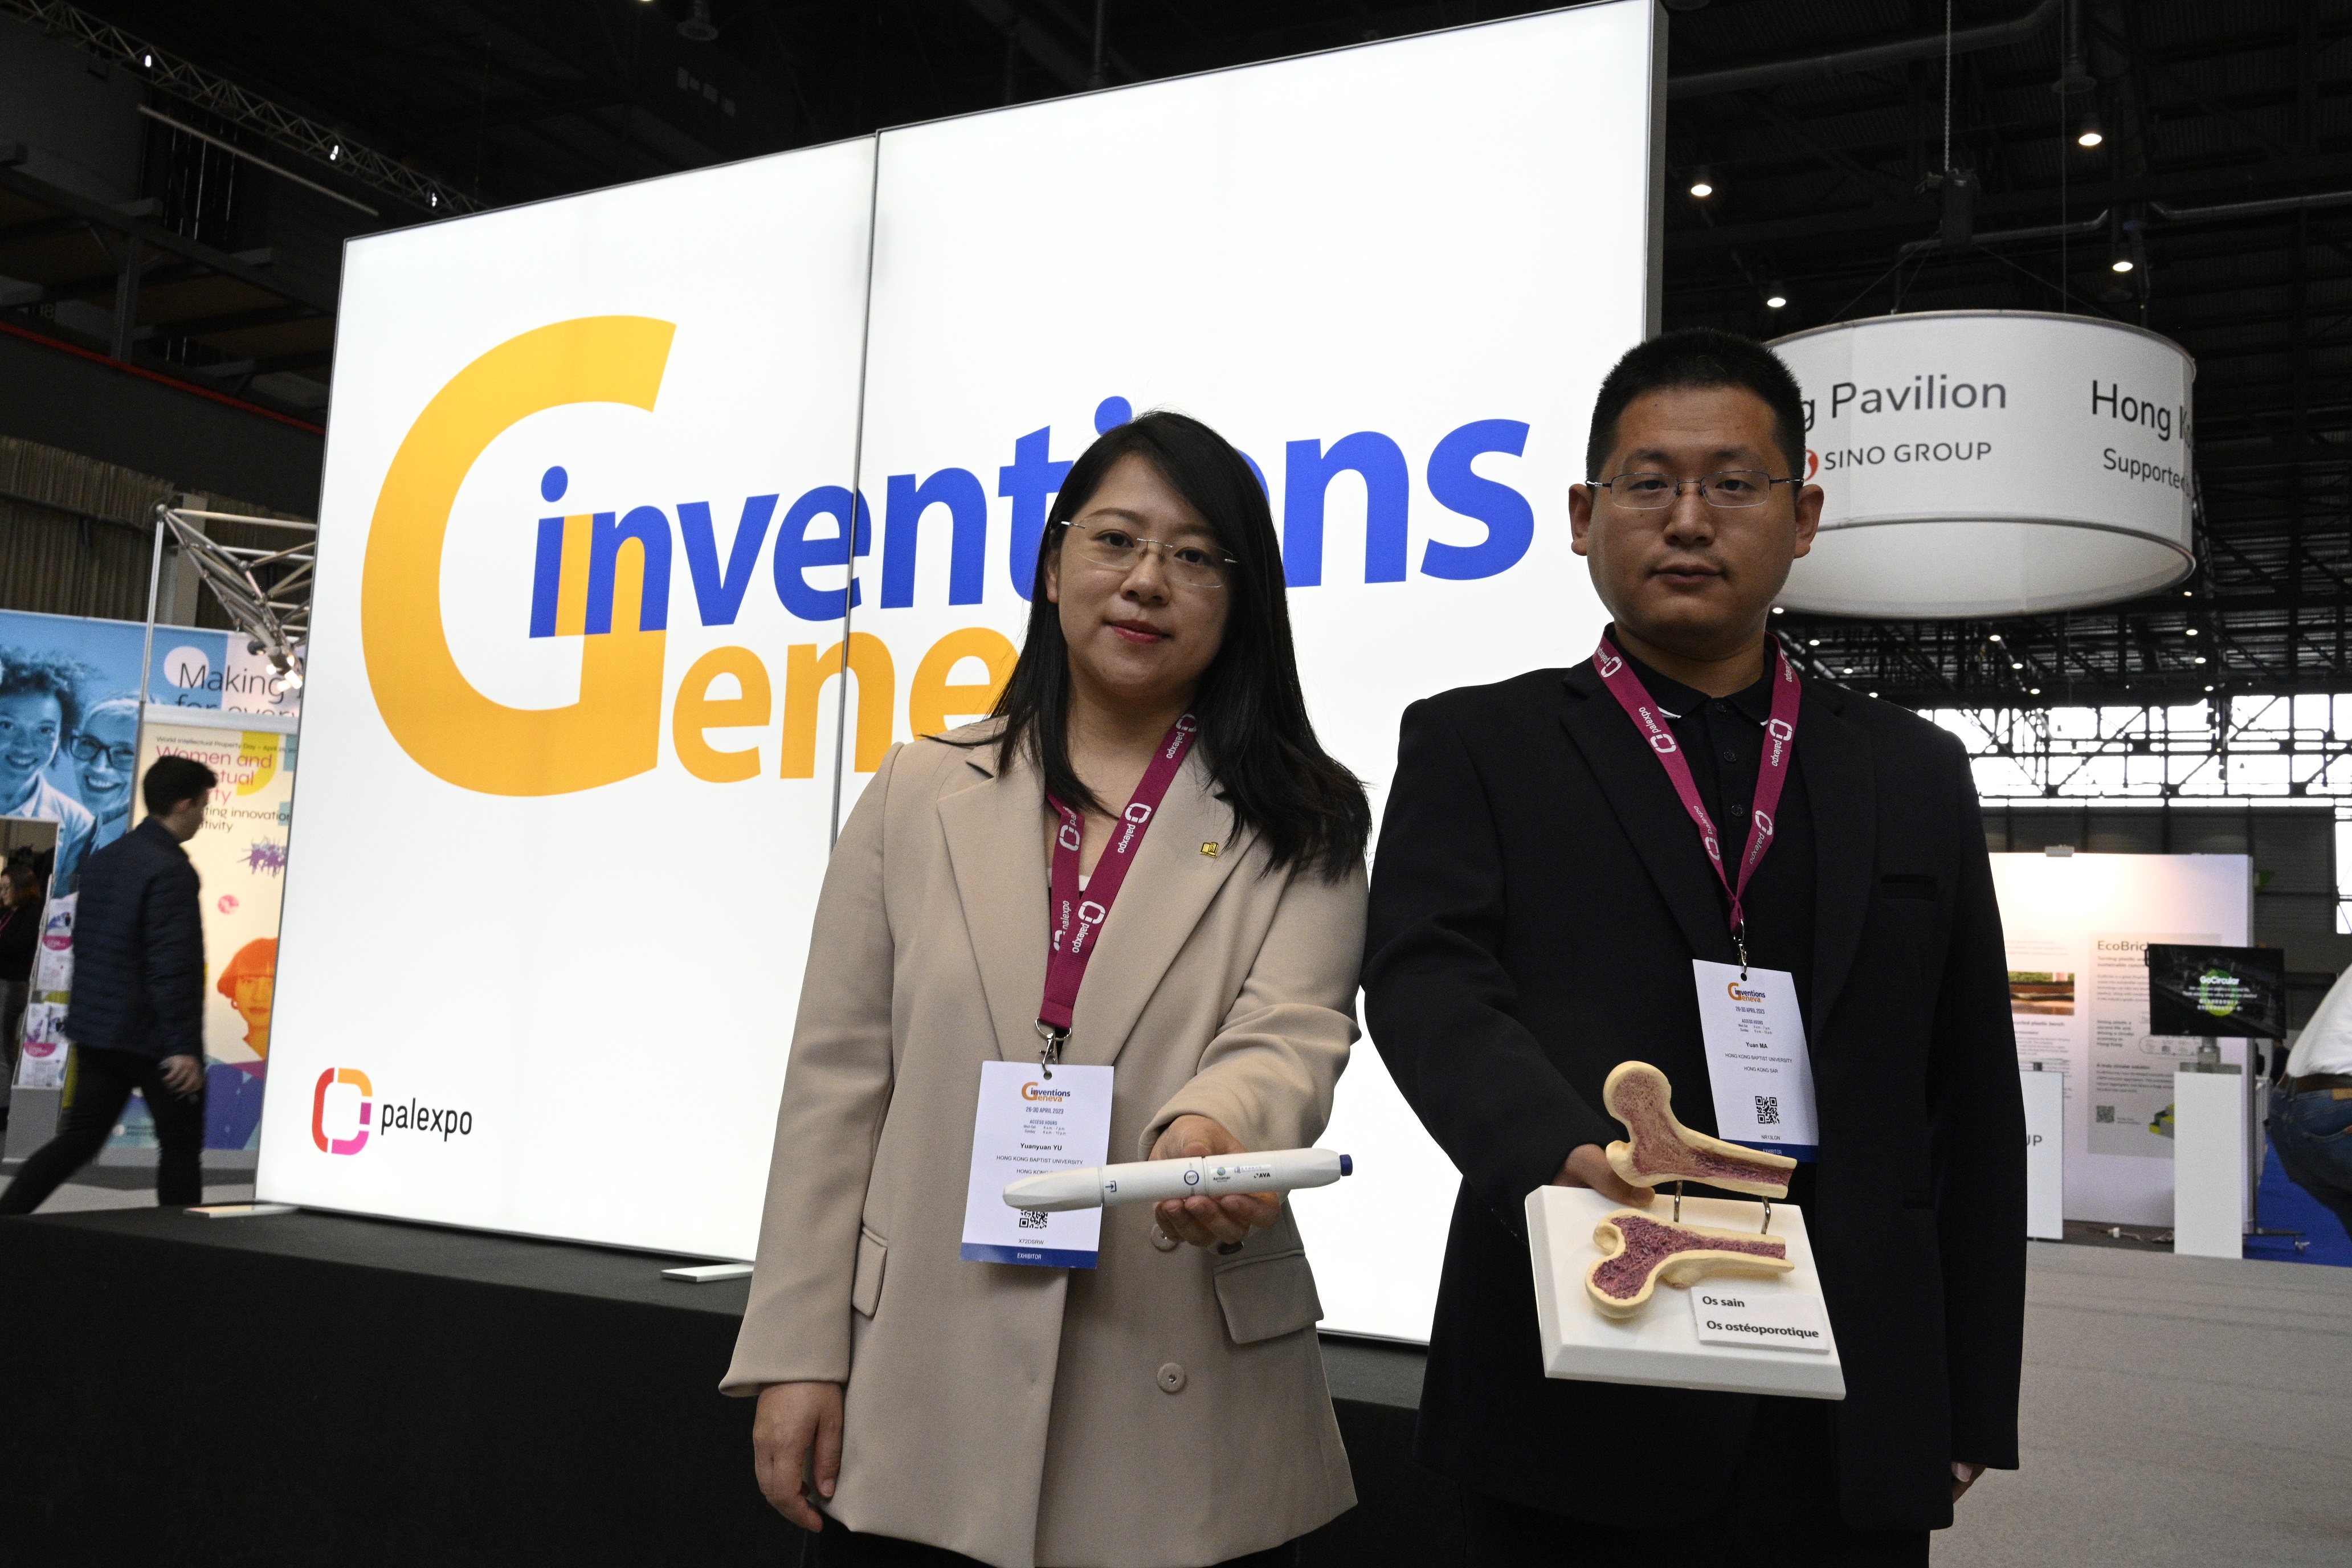  “An aptamer drug targeting sclerostin loop3 for bone anabolic therapy without increasing cardiovascular risk” project led by Dr Yu Yuanyuan (left) won a Silver Medal at the Geneva International Exhibition of Inventions.